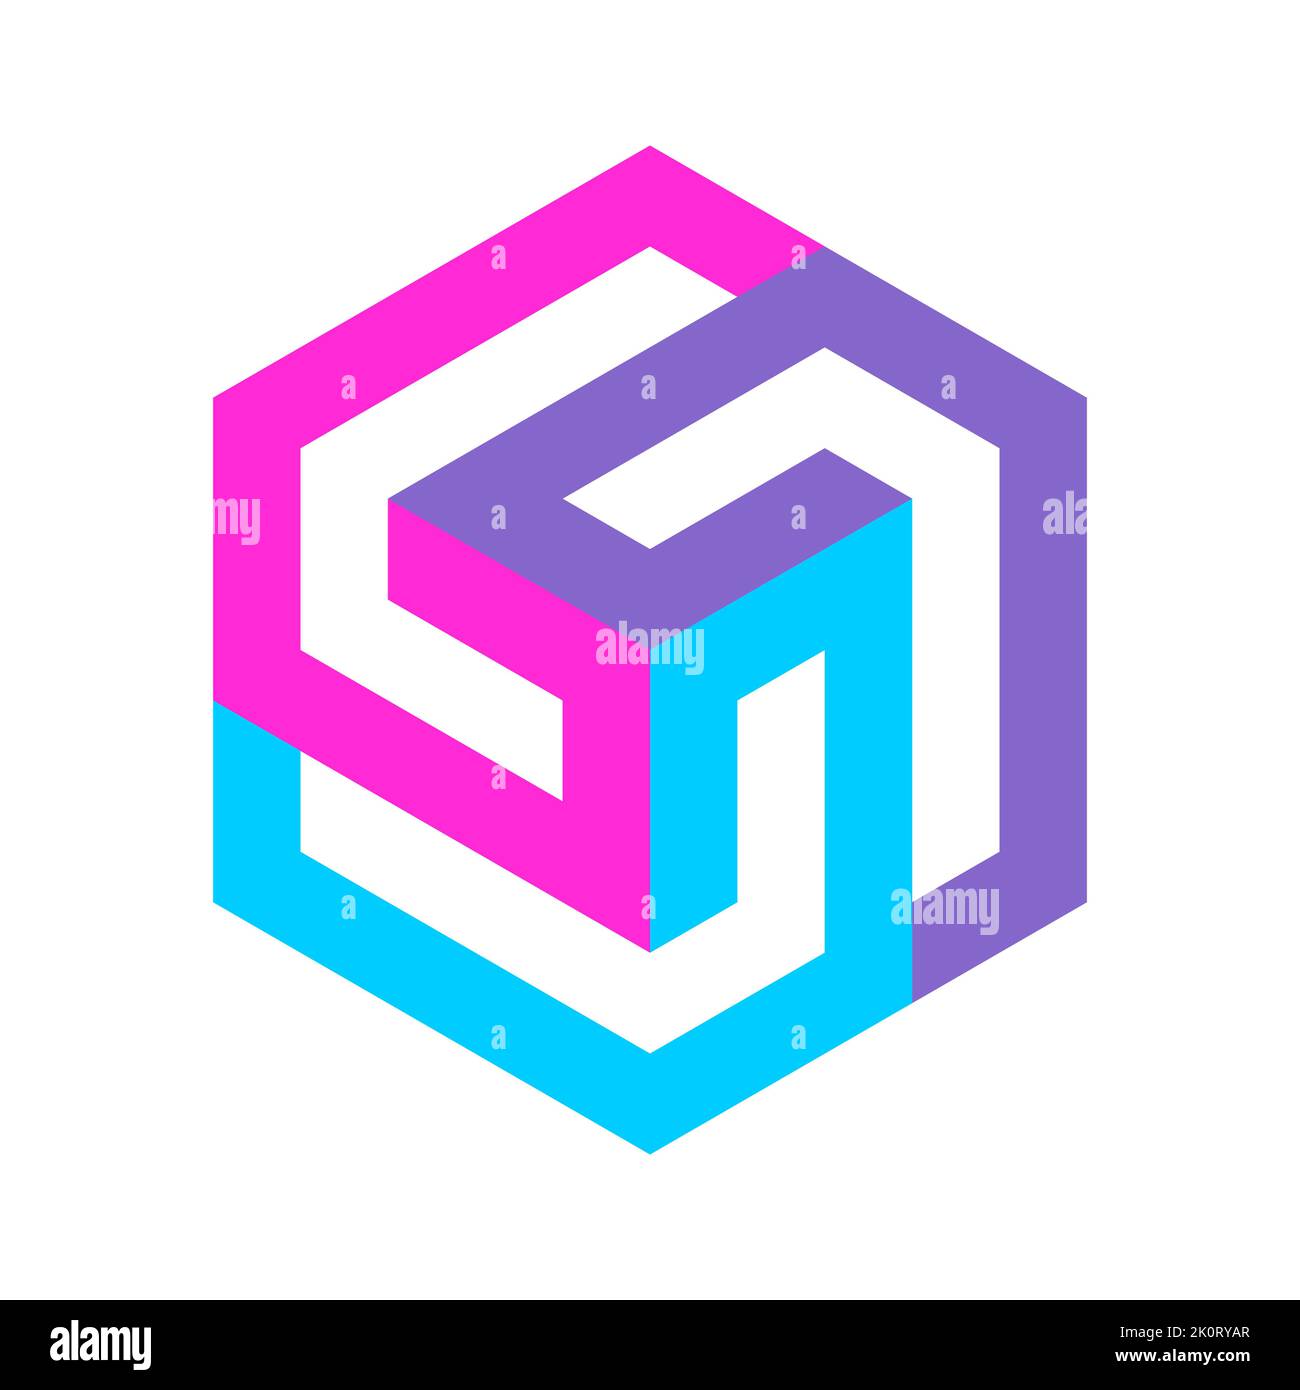 Colorful cube logo made of three elements. Triple L logo template. Geometric hexagon isometric shape. 3D puzzle game pieces. Building, architecture Stock Vector